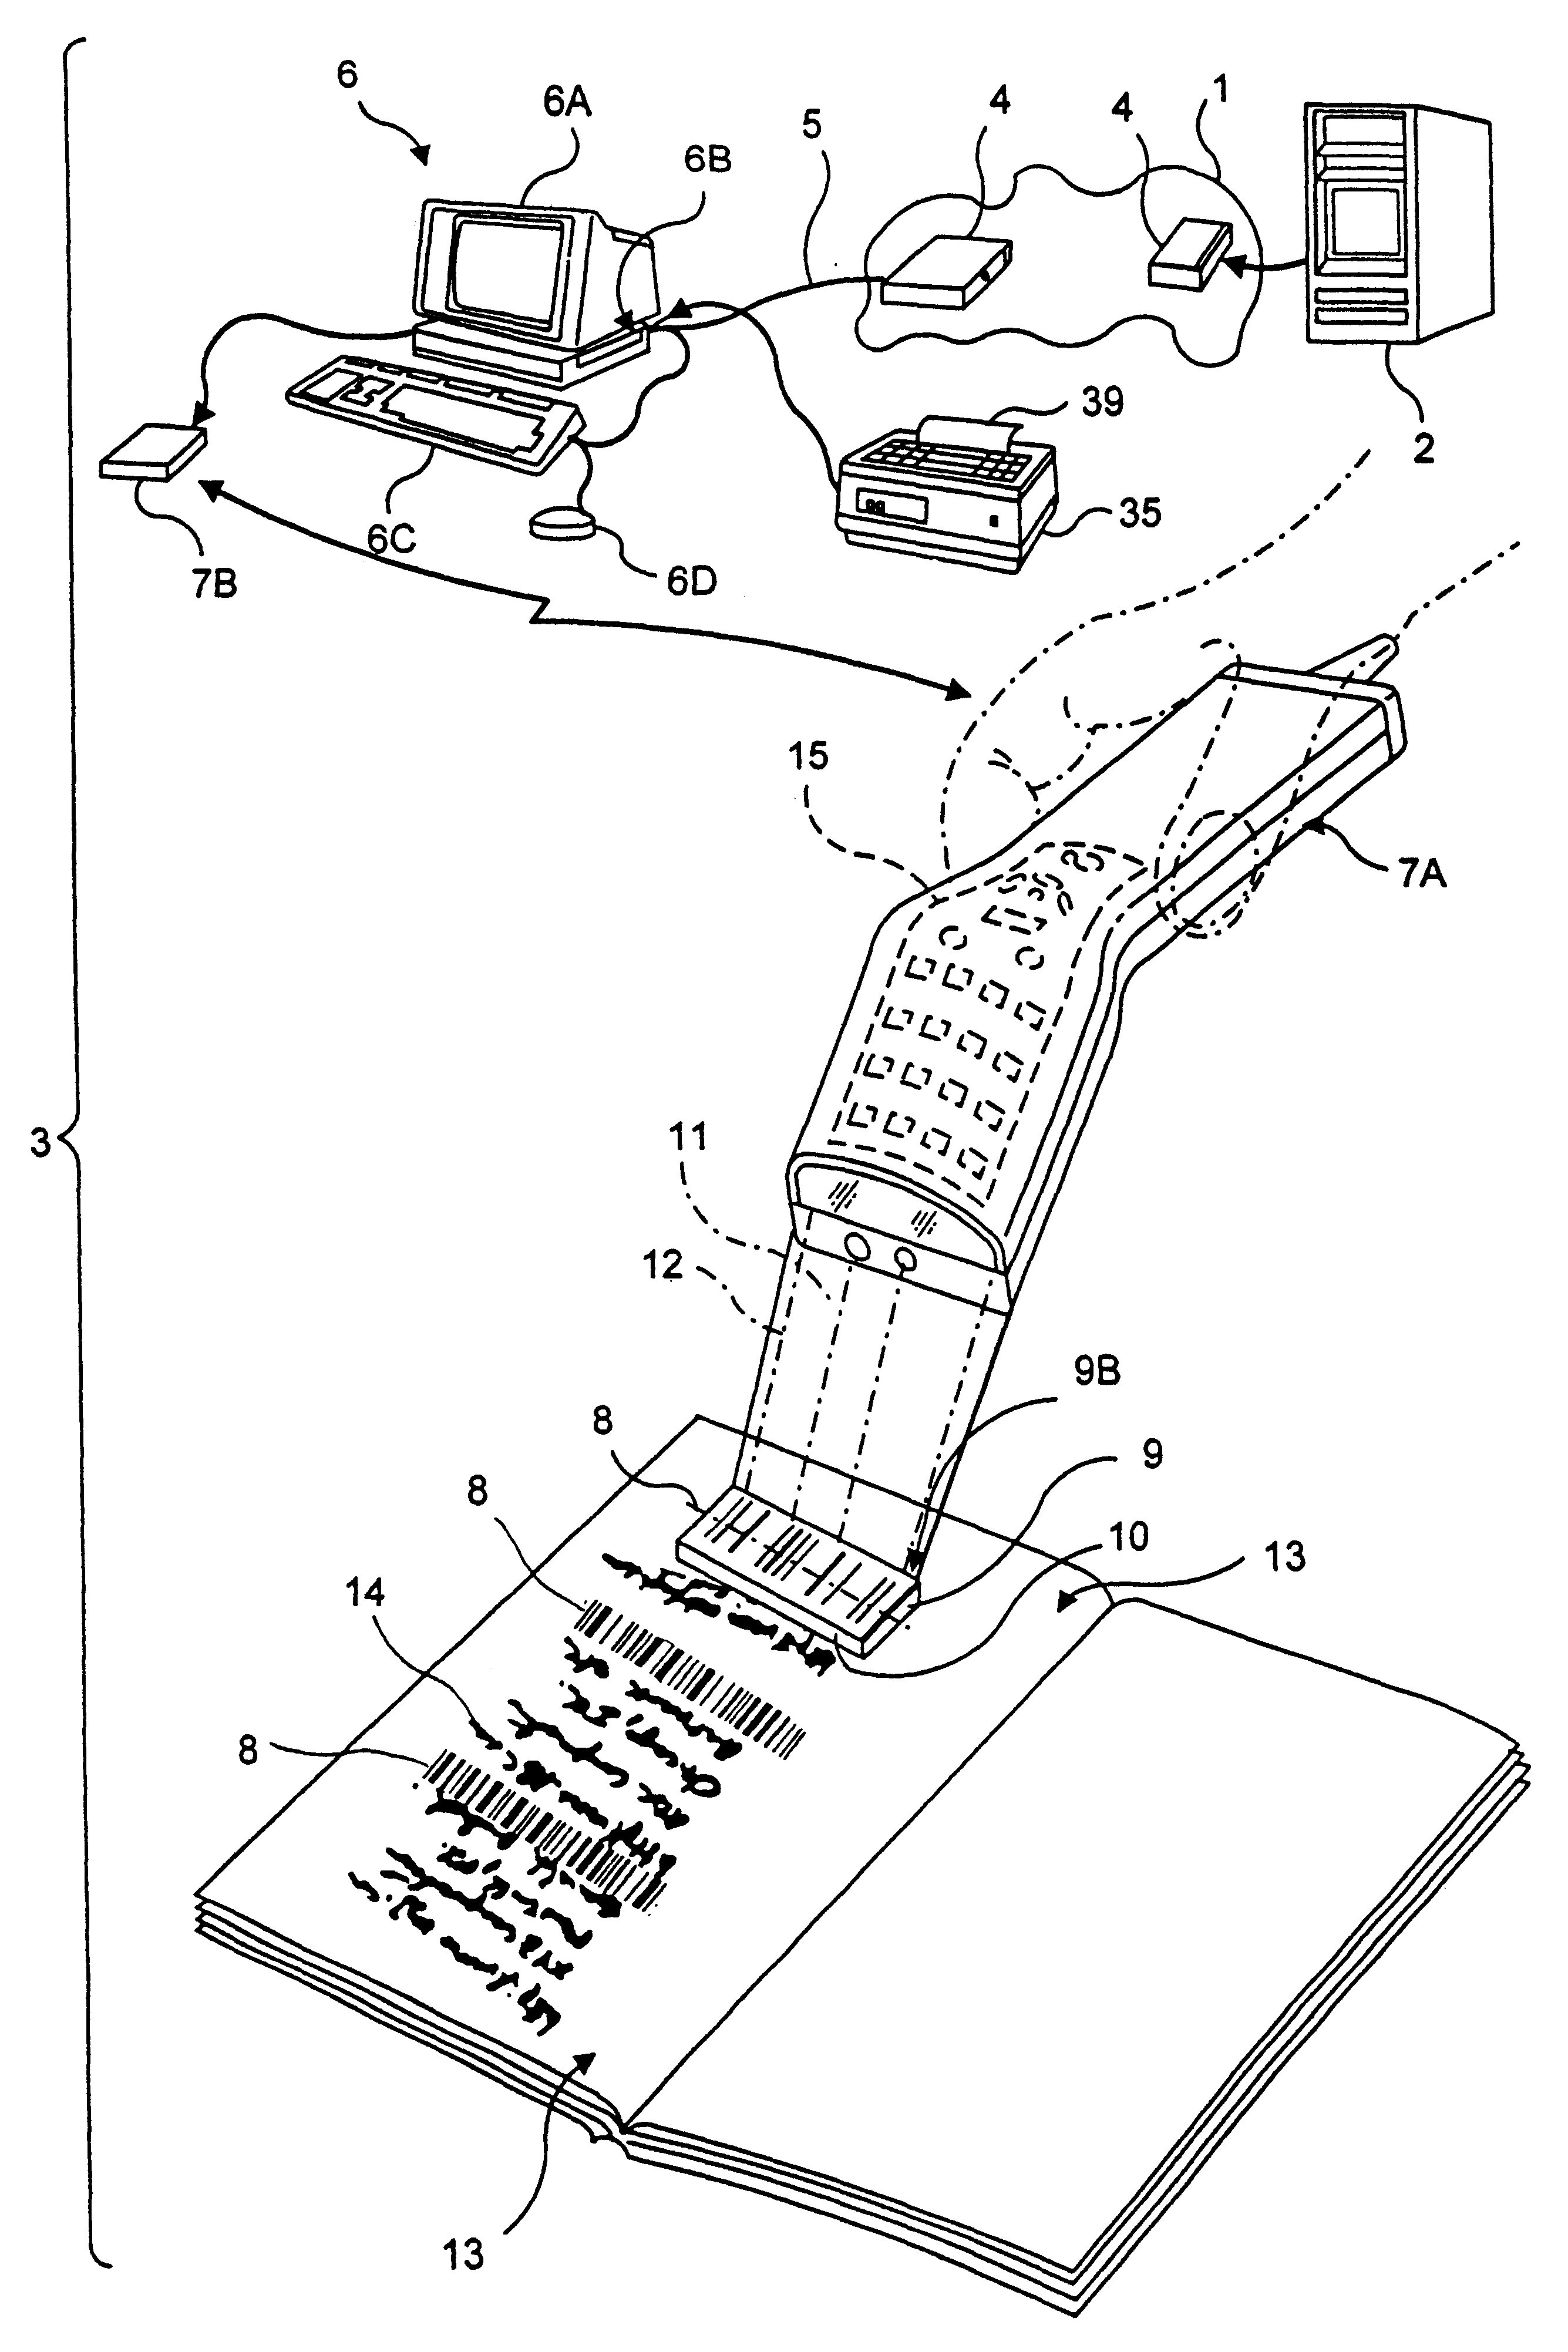 Web-based television system and method for enabling a viewer to access and display HTML-encoded documents located on the World Wide Web (WWW) by reading bar code symbols printed in a WWW-site guide using a wireless bar-code driven remote control device